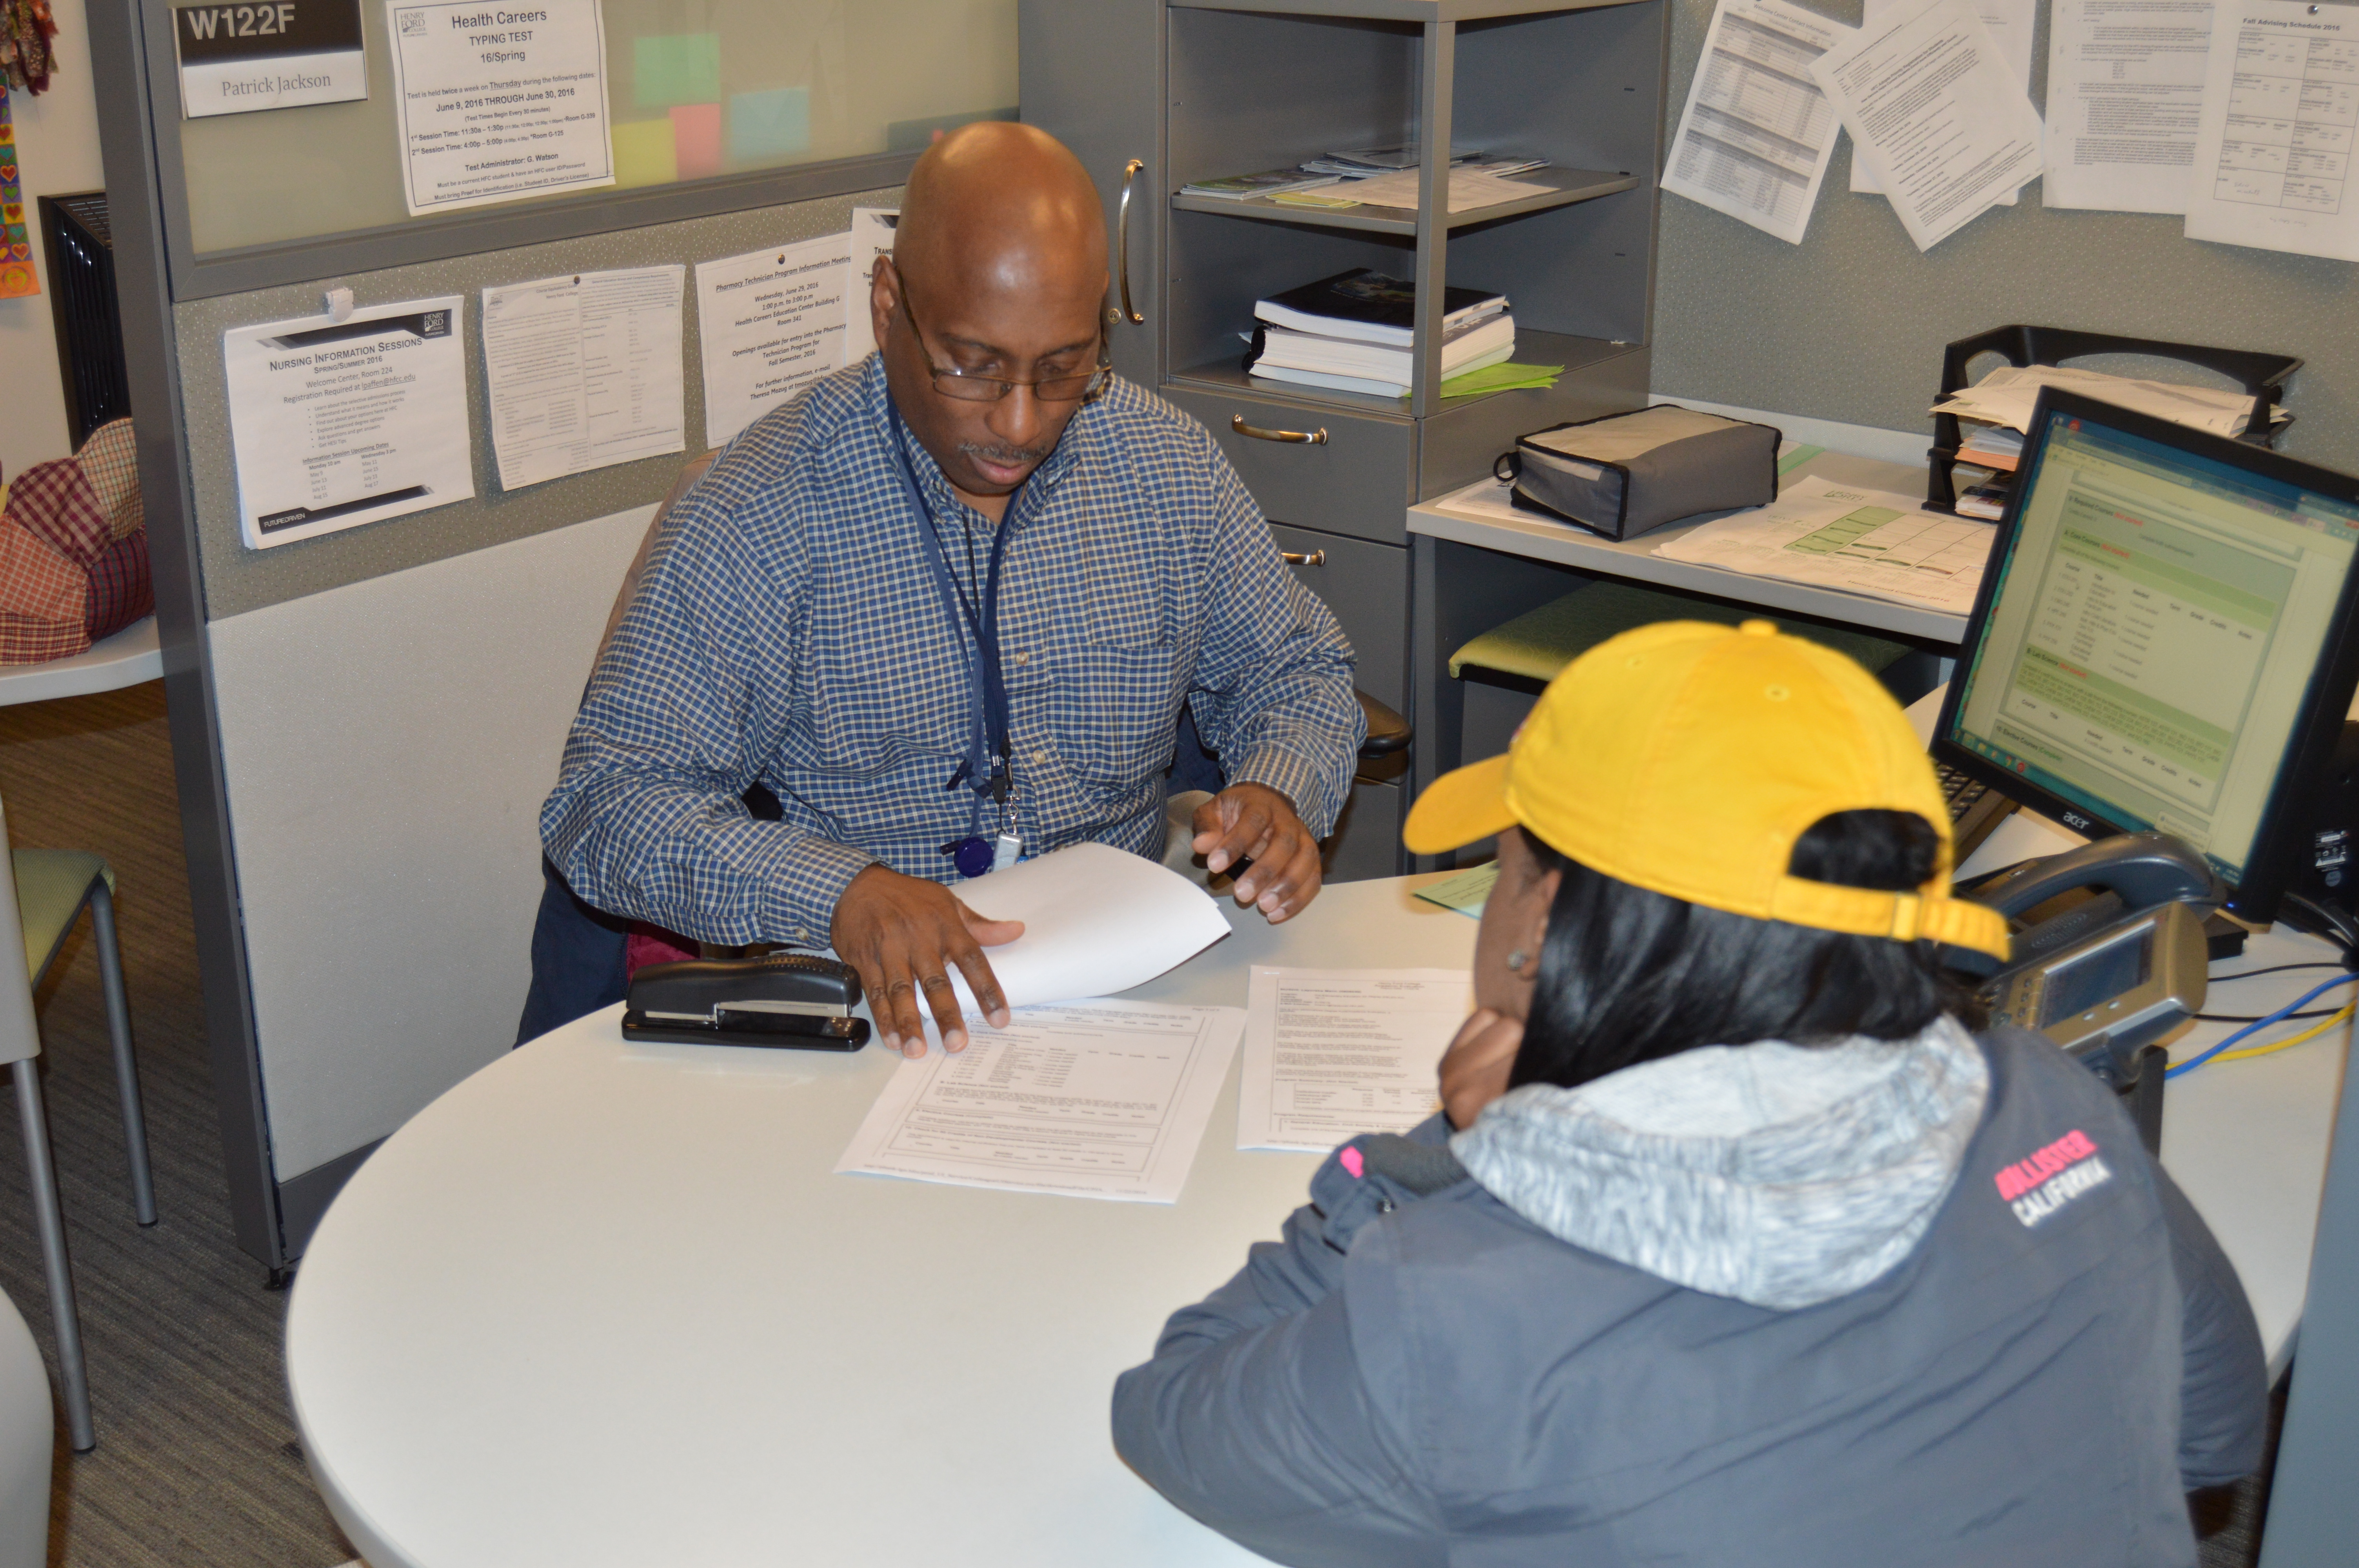 Student sitting at a circular table with advisor going over course schedule and program information